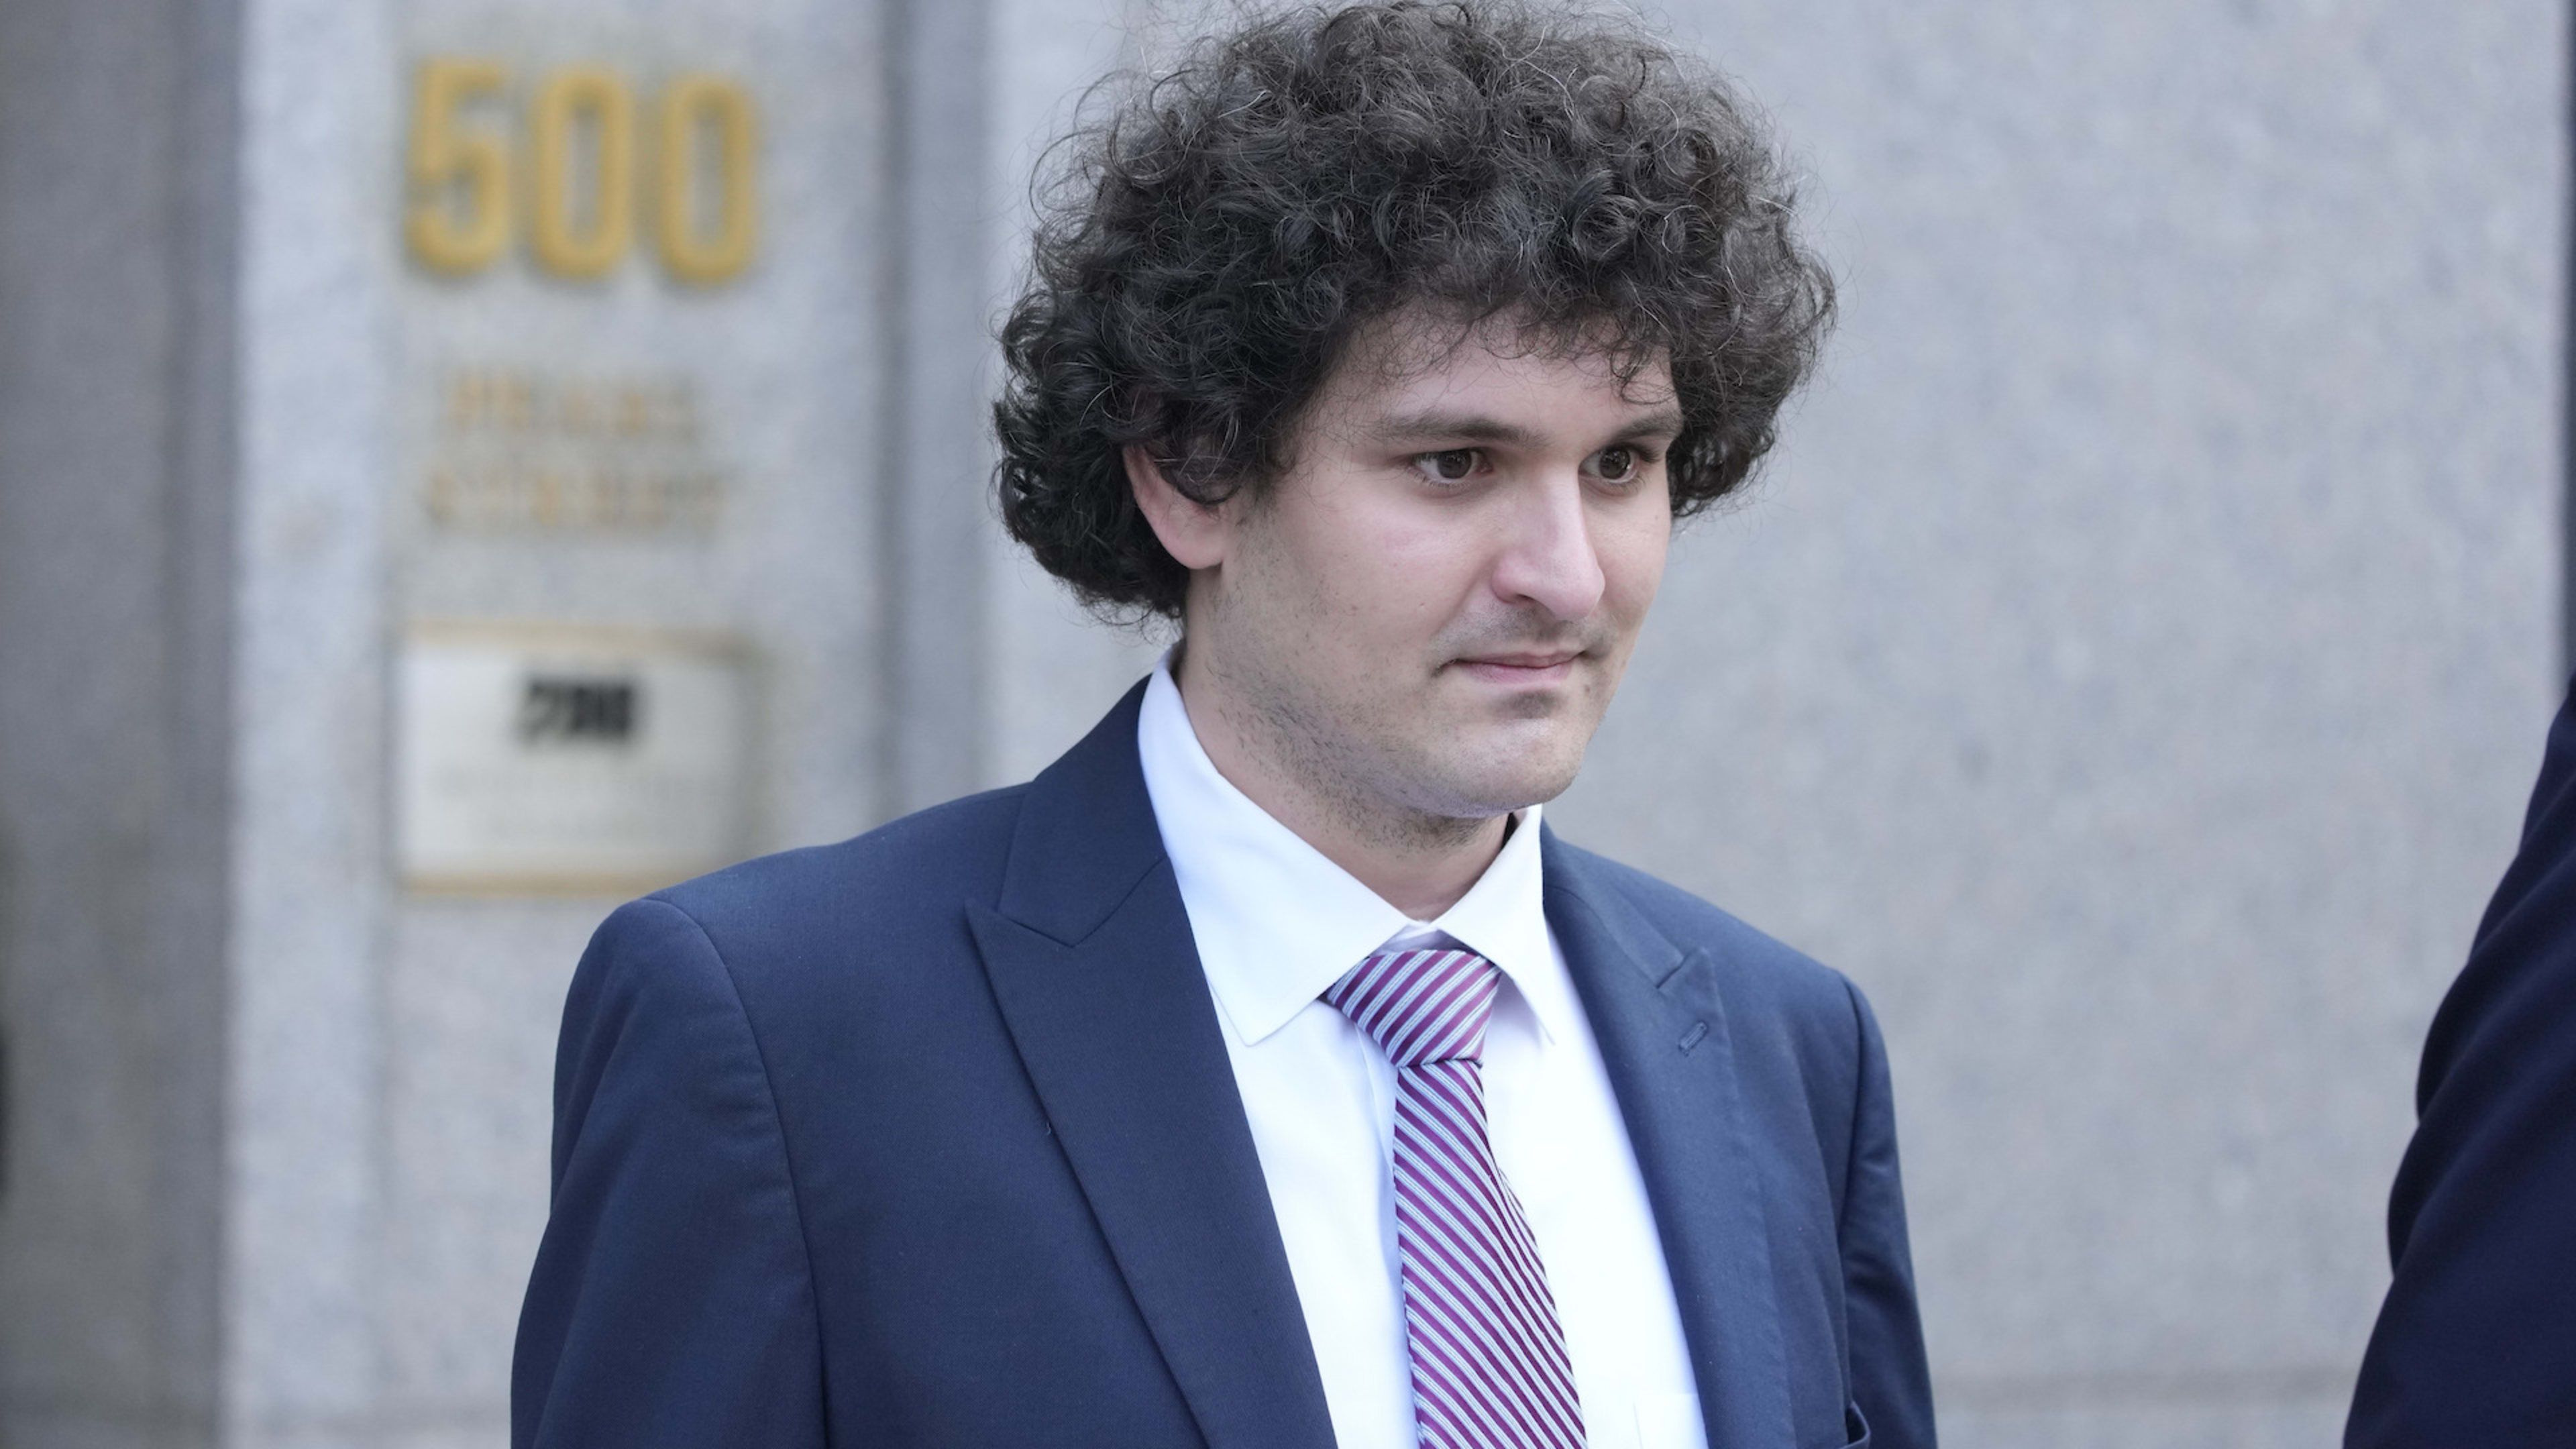 Prosecutors seek up to 50-year prison sentence for Sam Bankman-Fried’s ‘historic’ cryptocurrency fraud